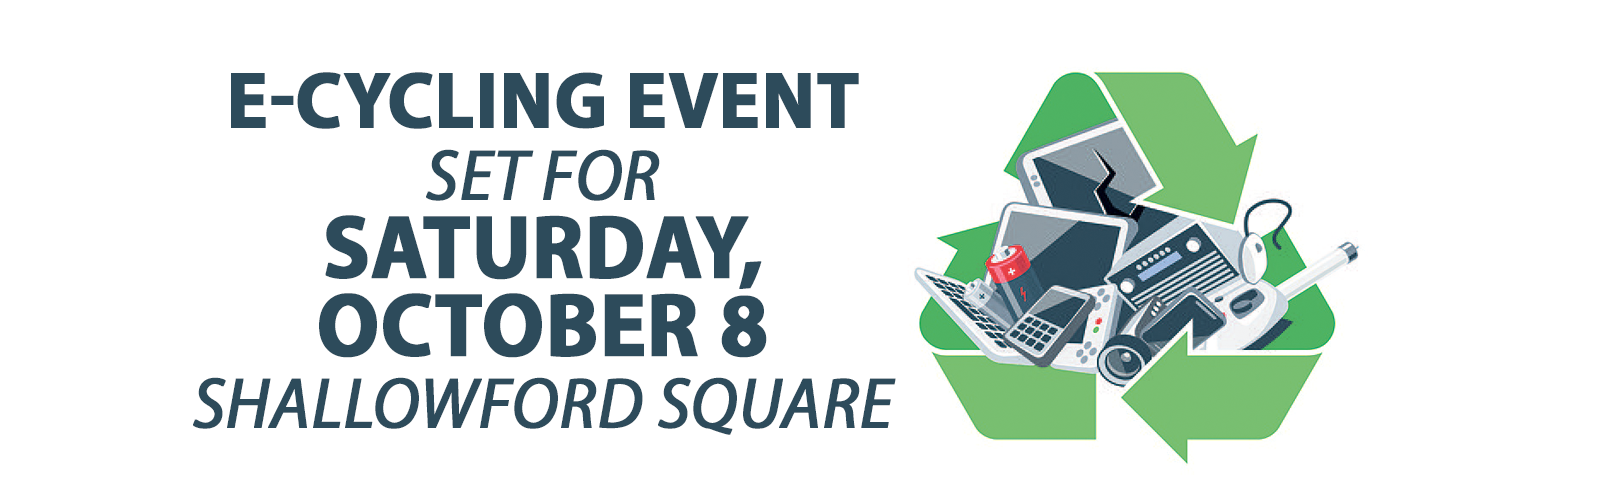 E-Waste Recyling Event